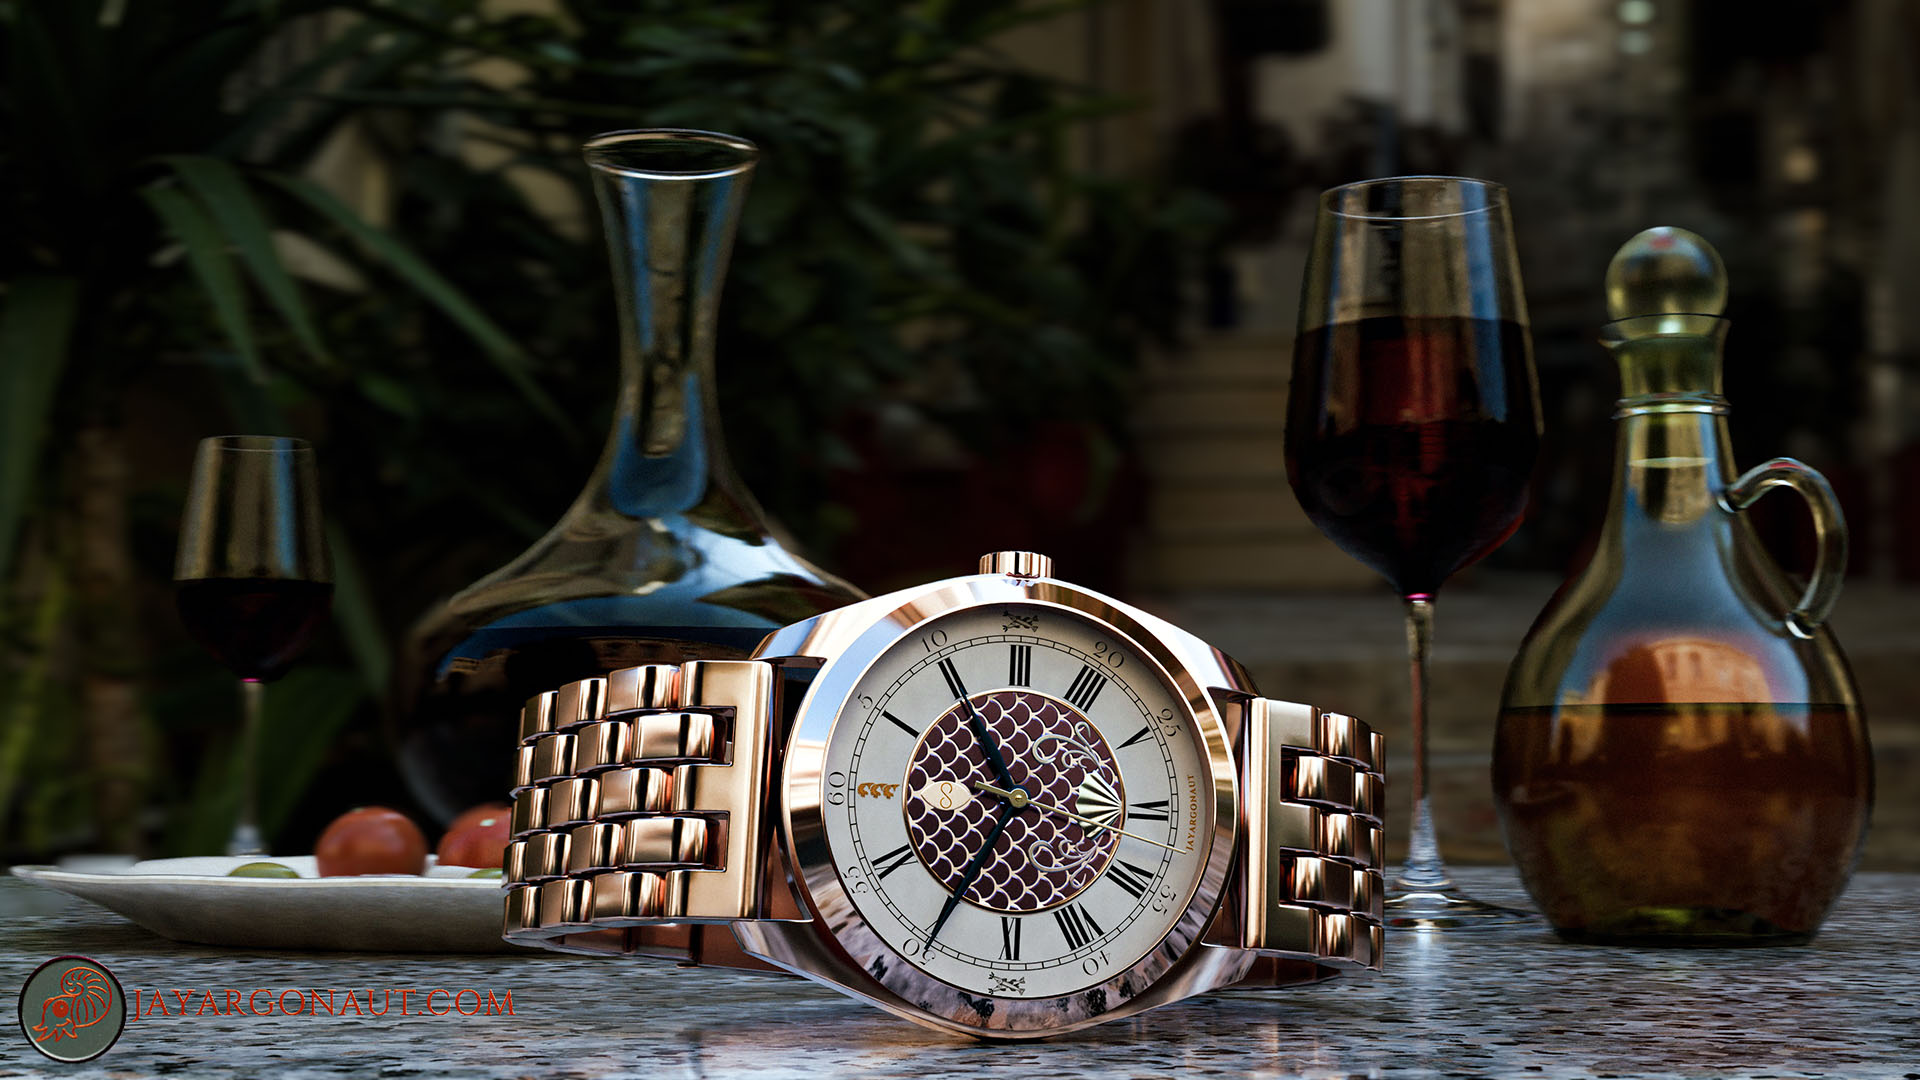 My fish/water styled watch lifestyle composition with scales pattern instanced over a vector grid and rose-gold material application. Designed, modelled, and rendered using Blender 4.0 creative suite.